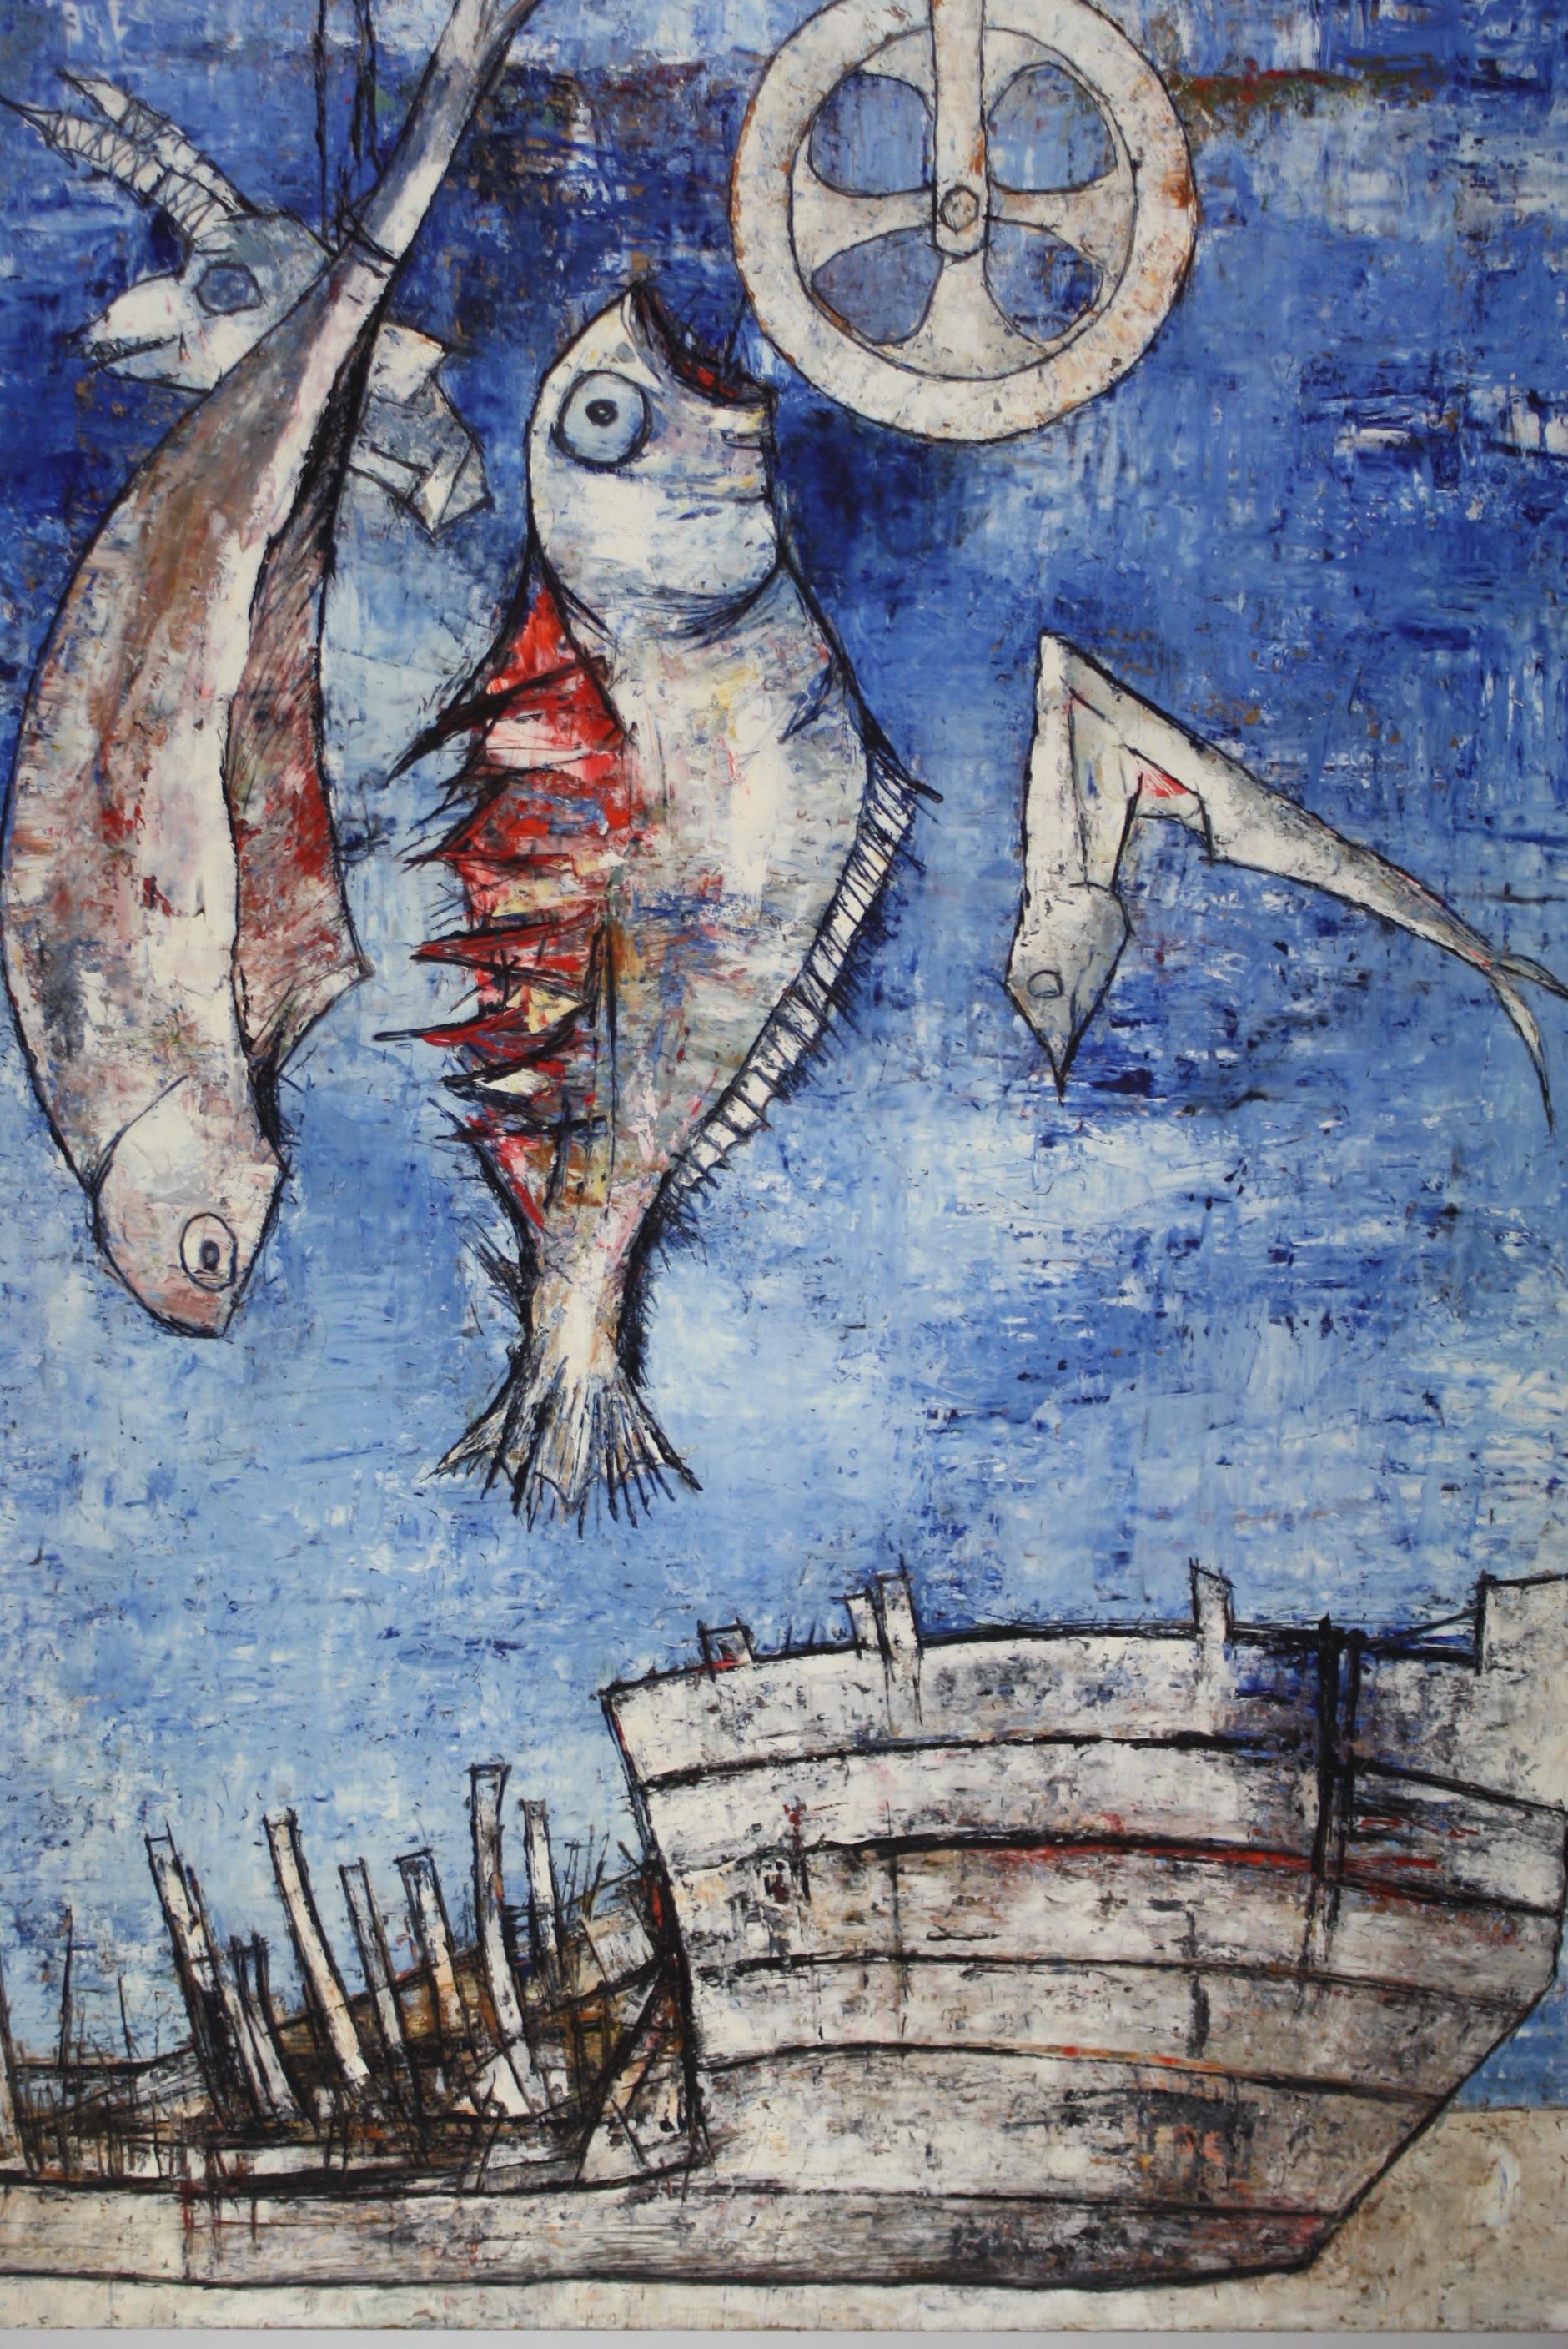 Modern Catch of the Day Blue Vision of a Destroyed Ship on the Sand with Fishes Hanging For Sale